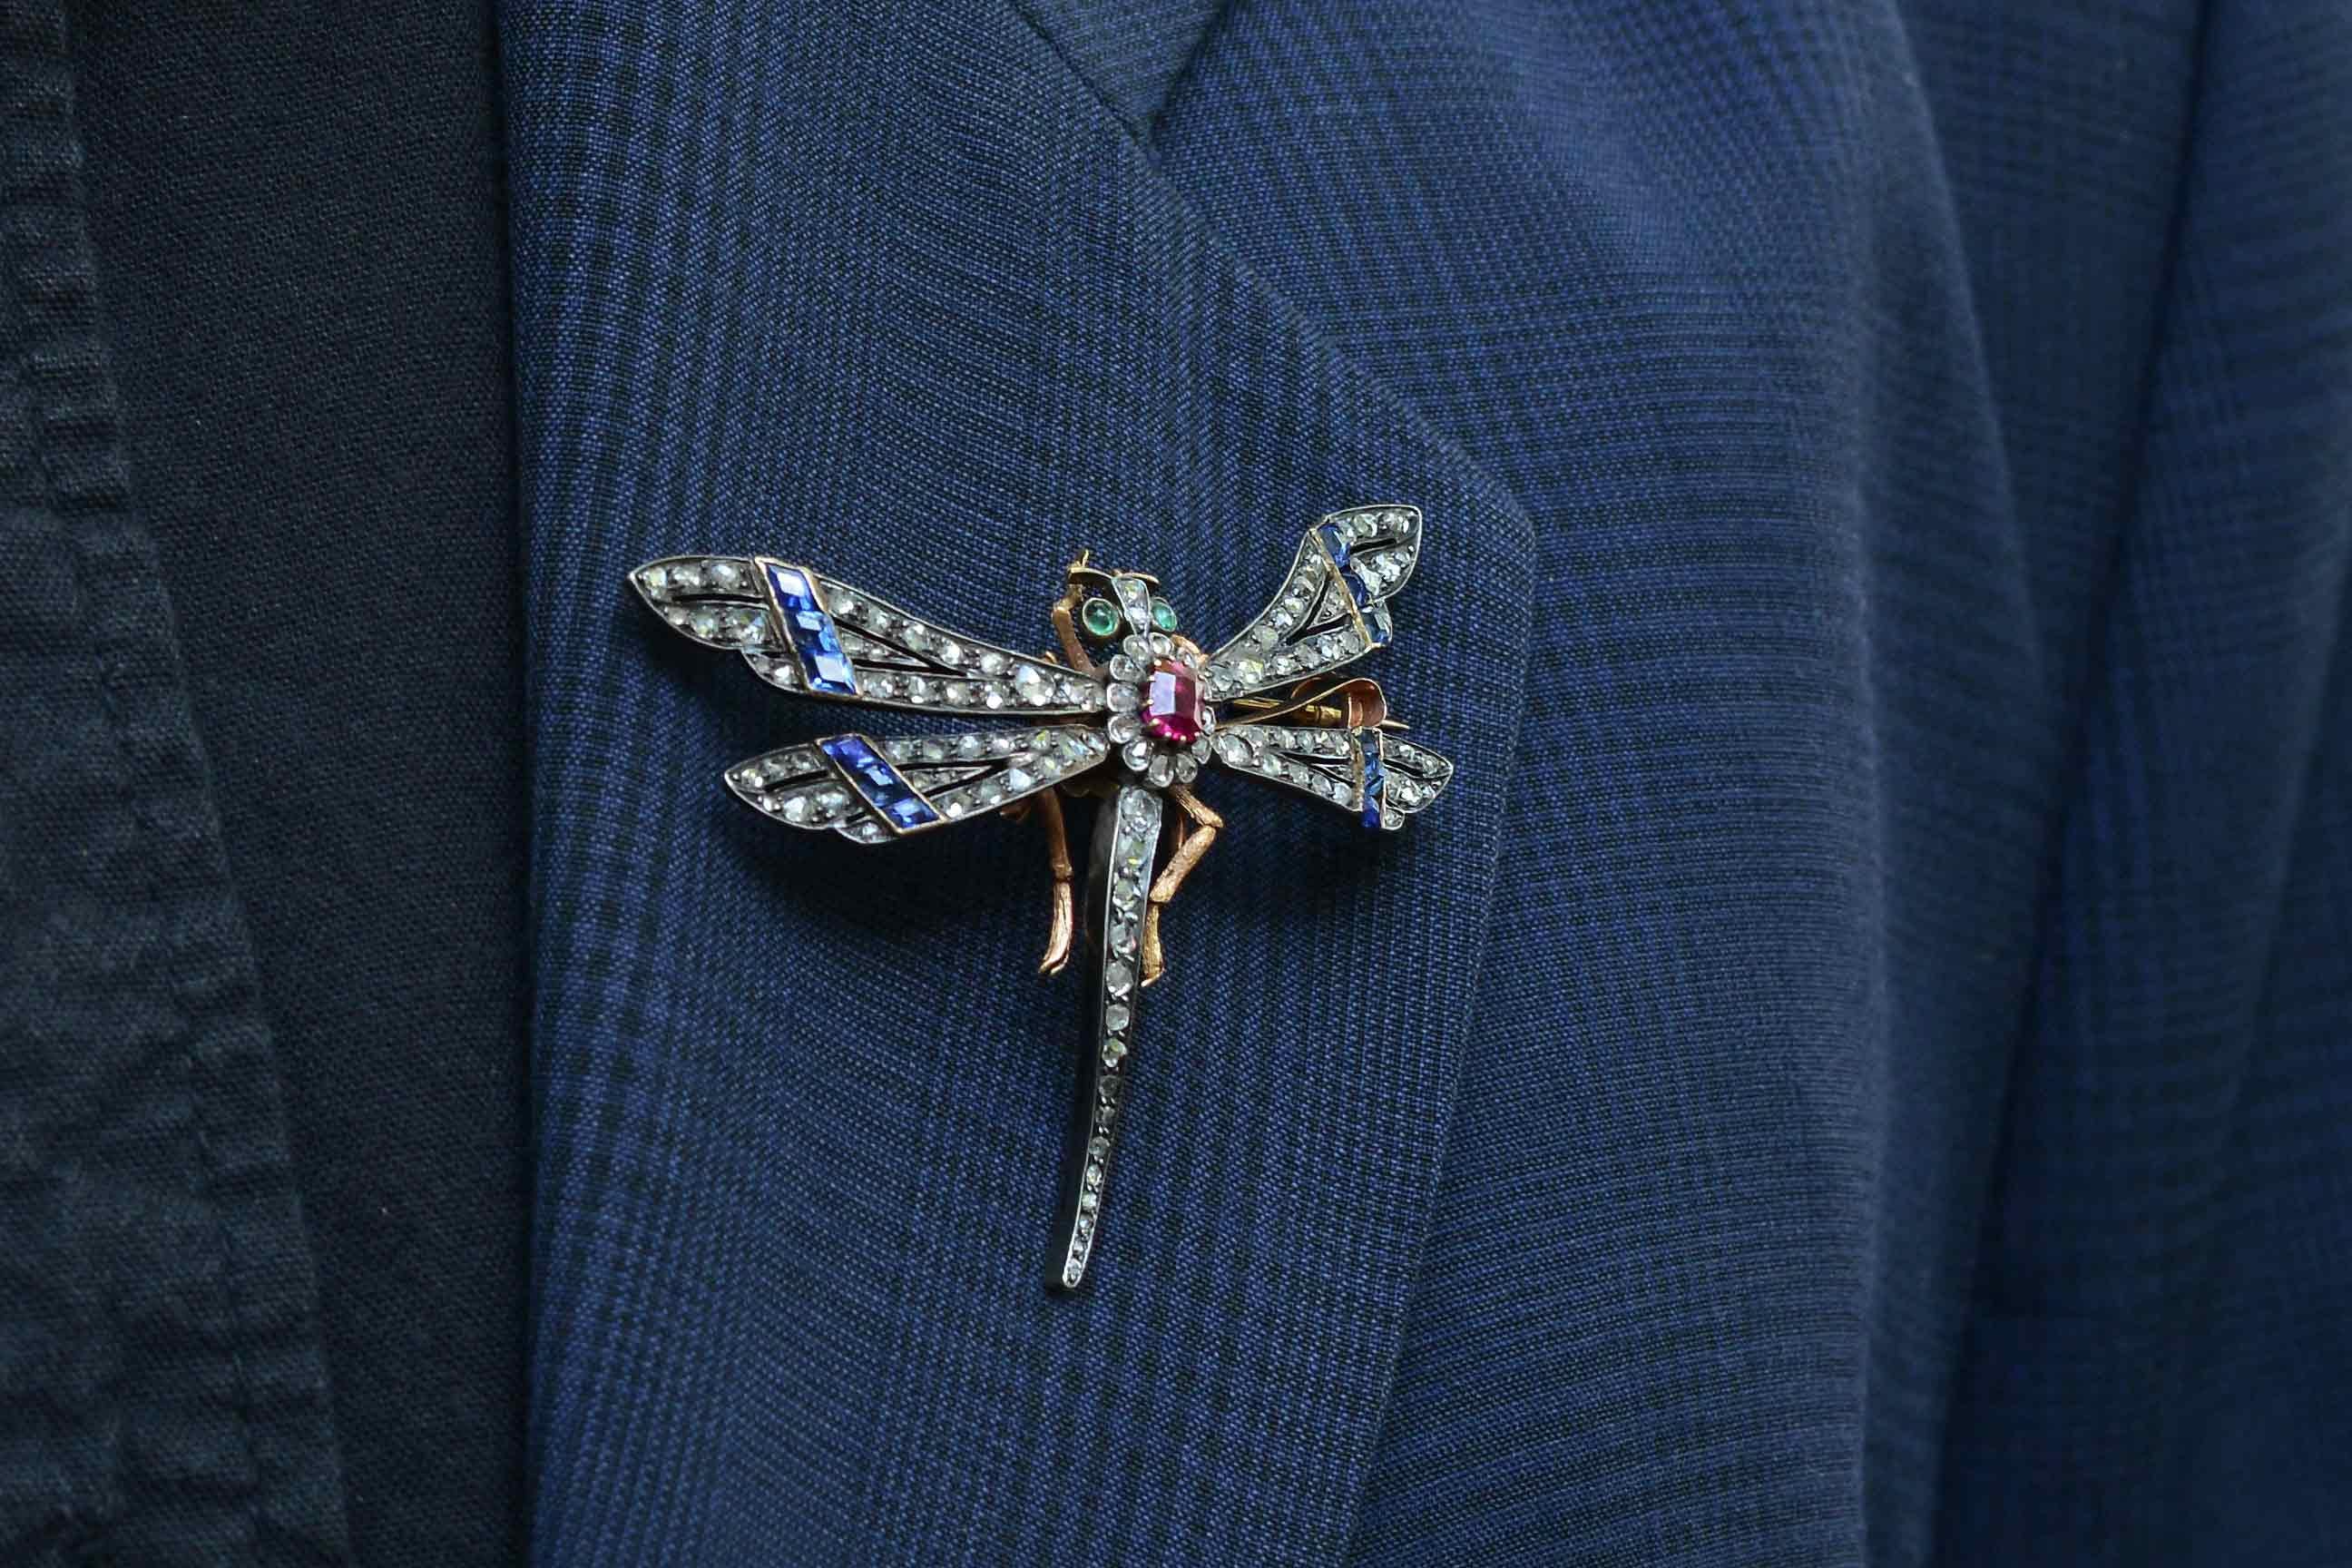 A beautiful antique insect pin, made in the late 1800s during the Victorian Era. En Tremblant, French for 